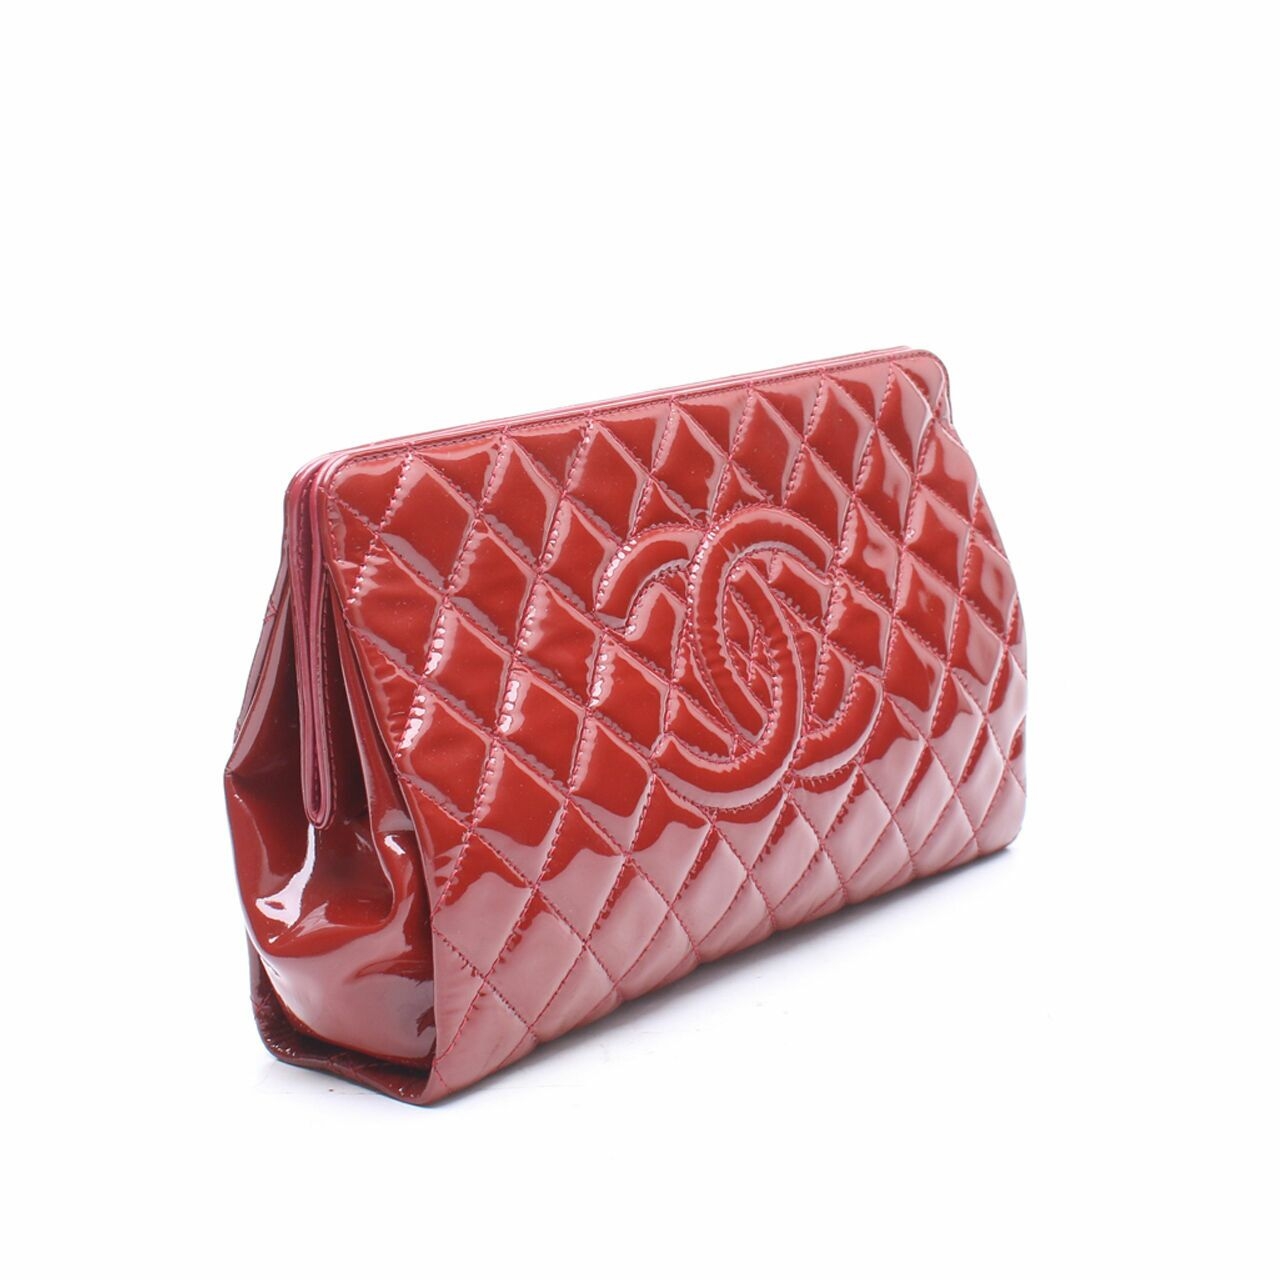 Chanel Red Quilted Patent Leather Clutch